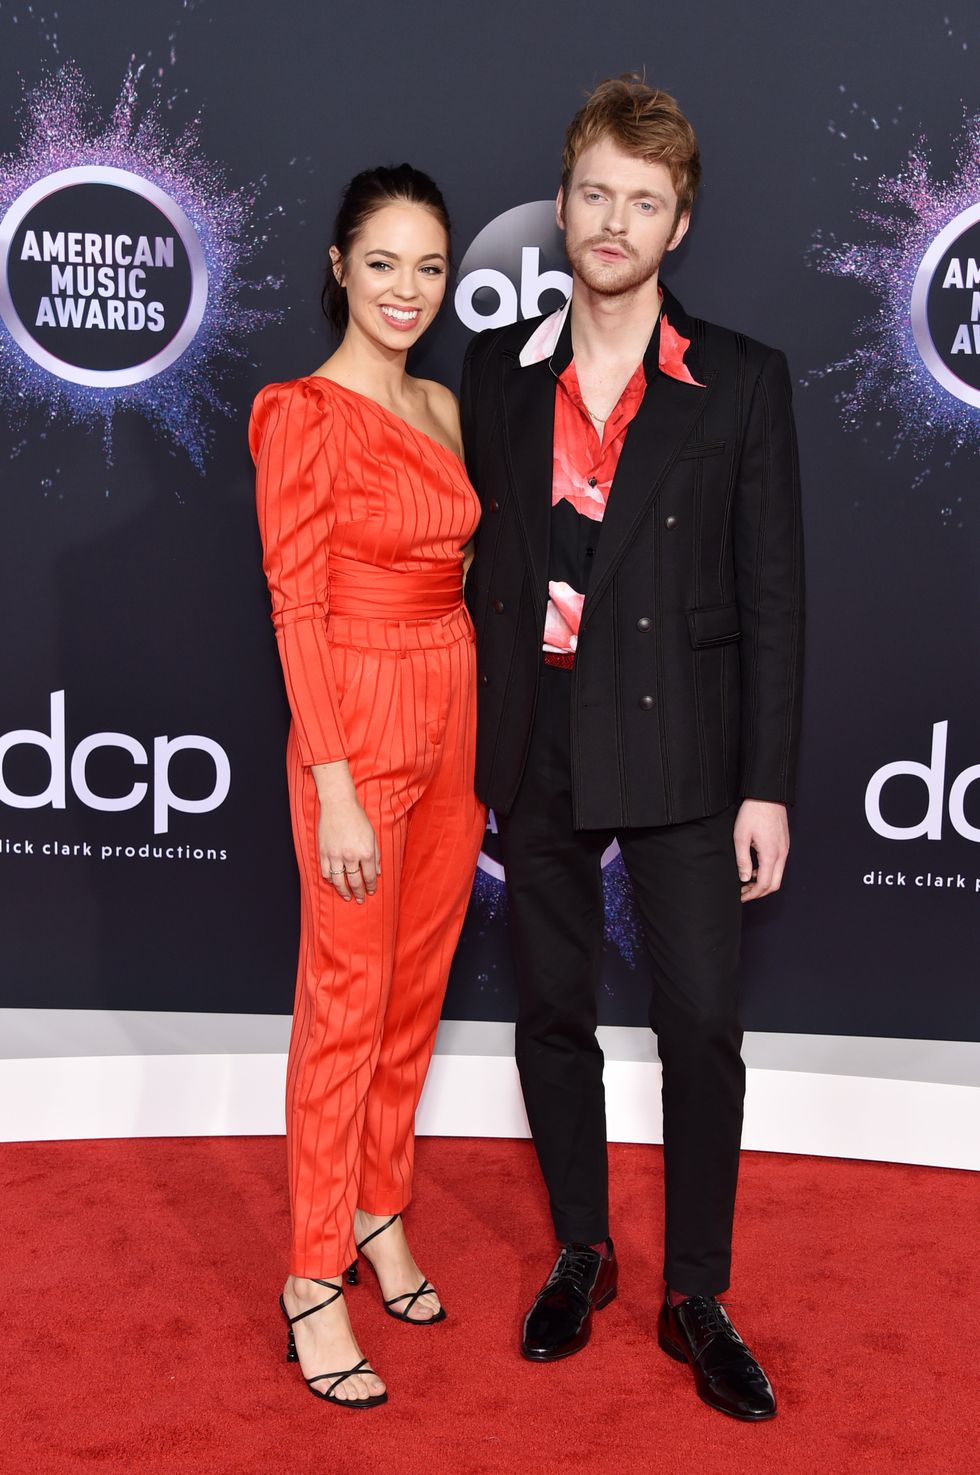 Finneas O'Connell at the 2019 American Music Awards - Arrivals2019 American Music Awards - Arrivals